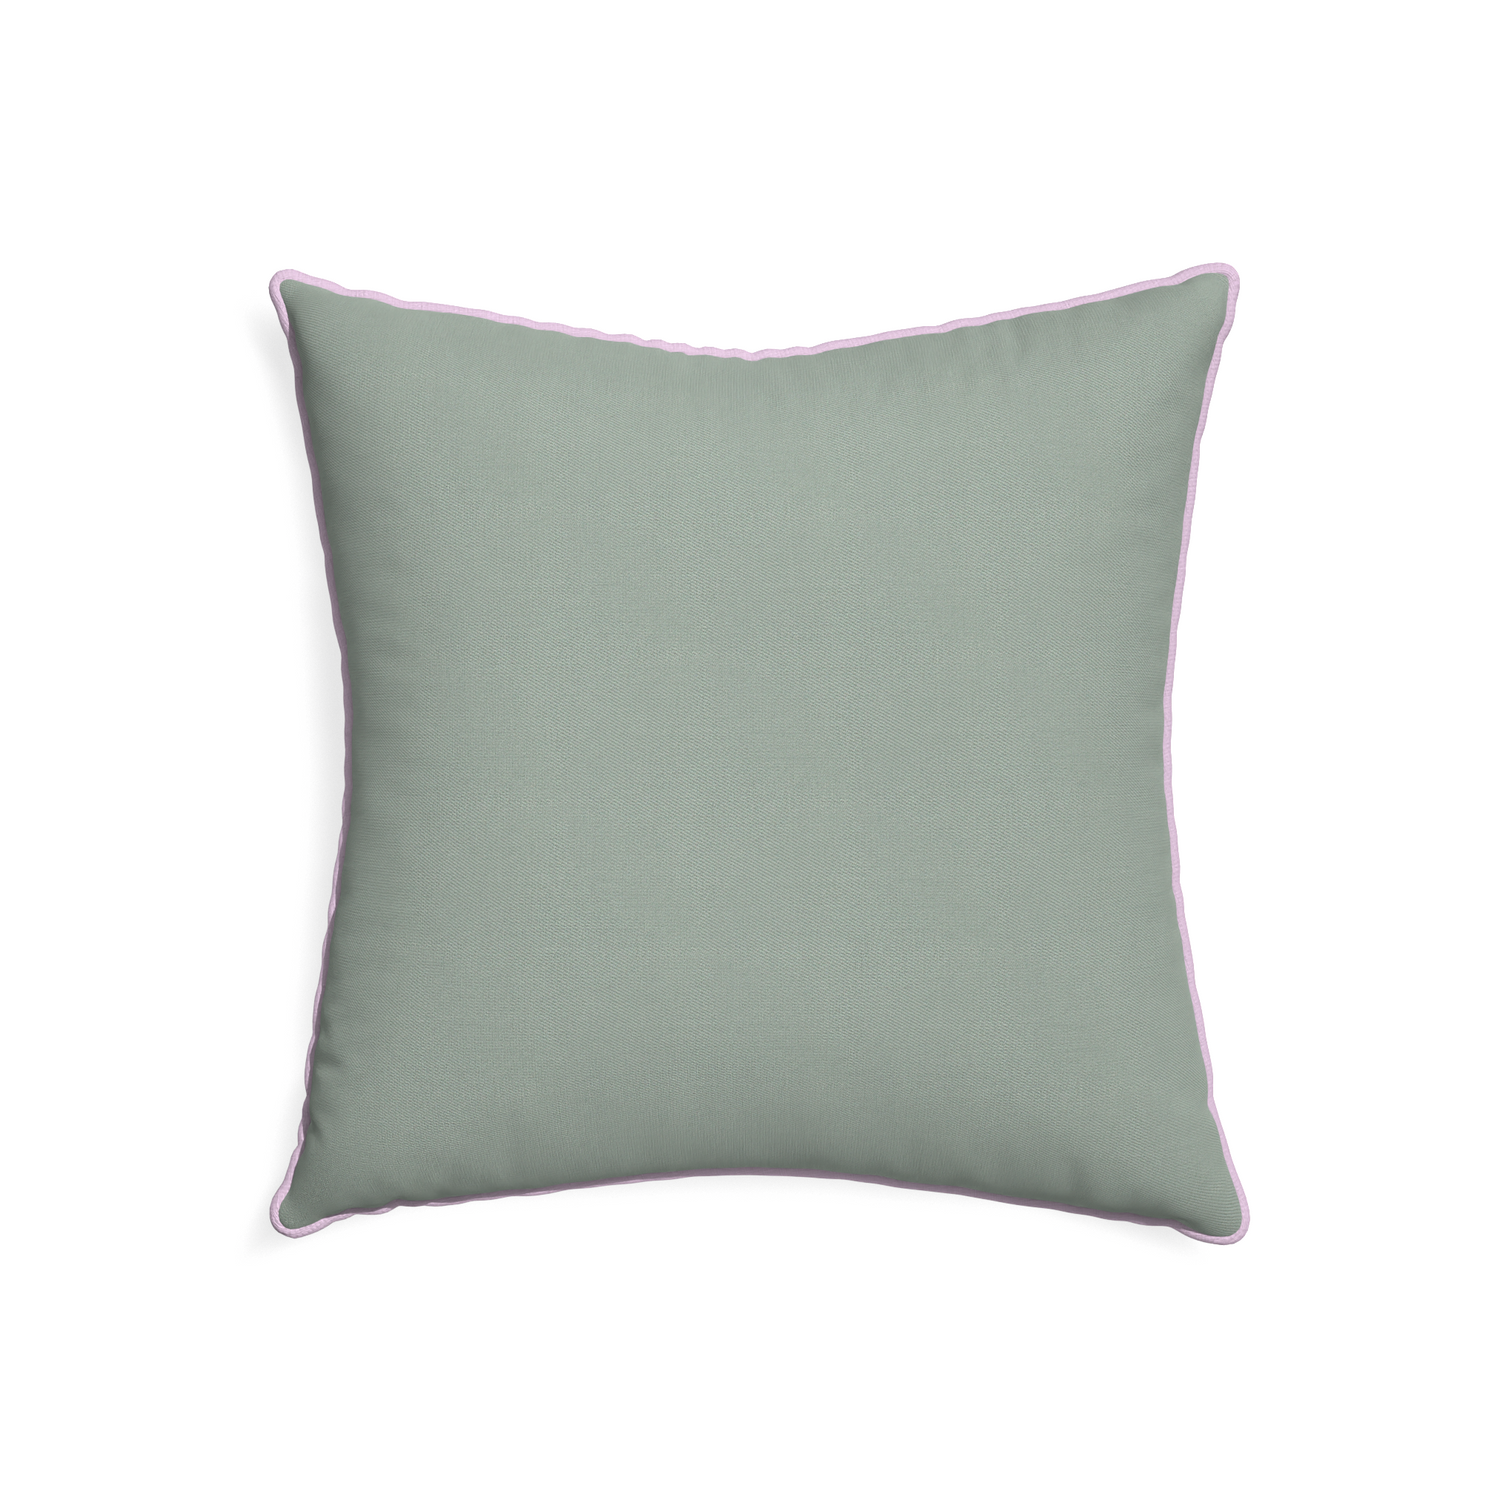 22-square sage custom pillow with l piping on white background